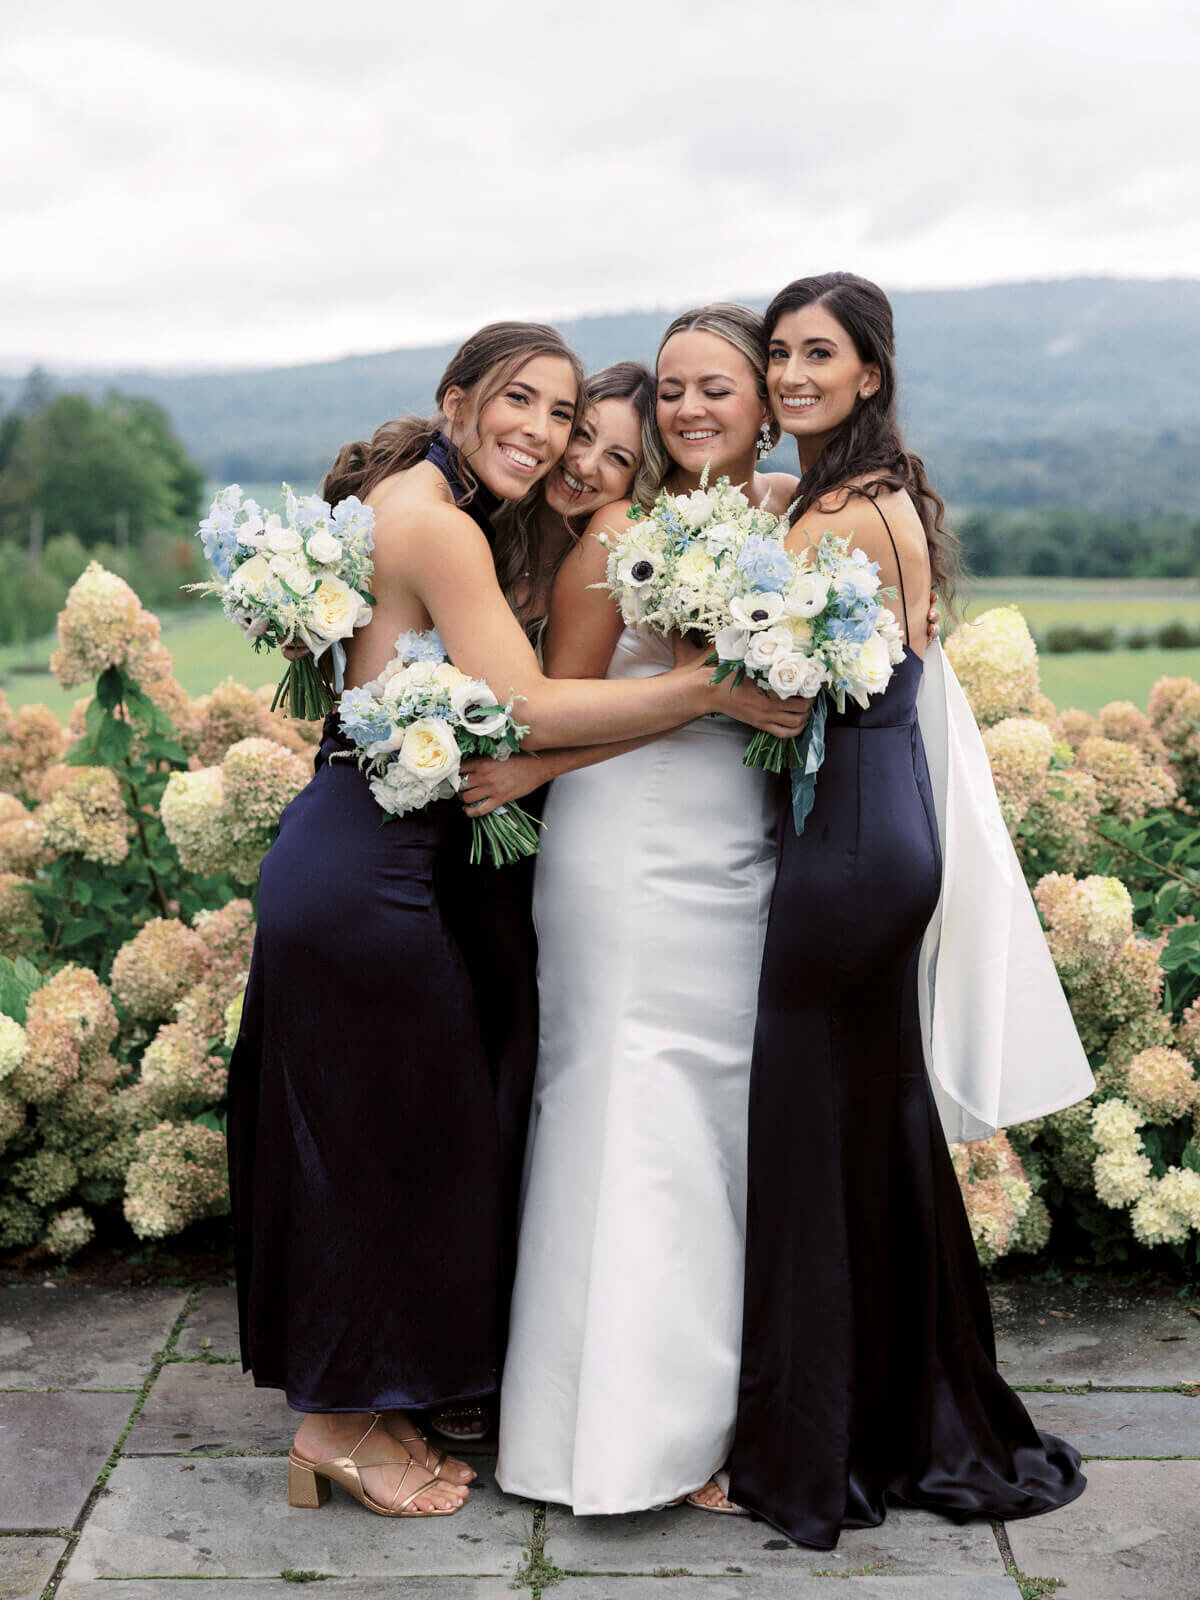 The bride and her bridesmaids are happily hugging each other in a garden at The Lion Rock Farm, CT. Image by Jenny Fu Studio